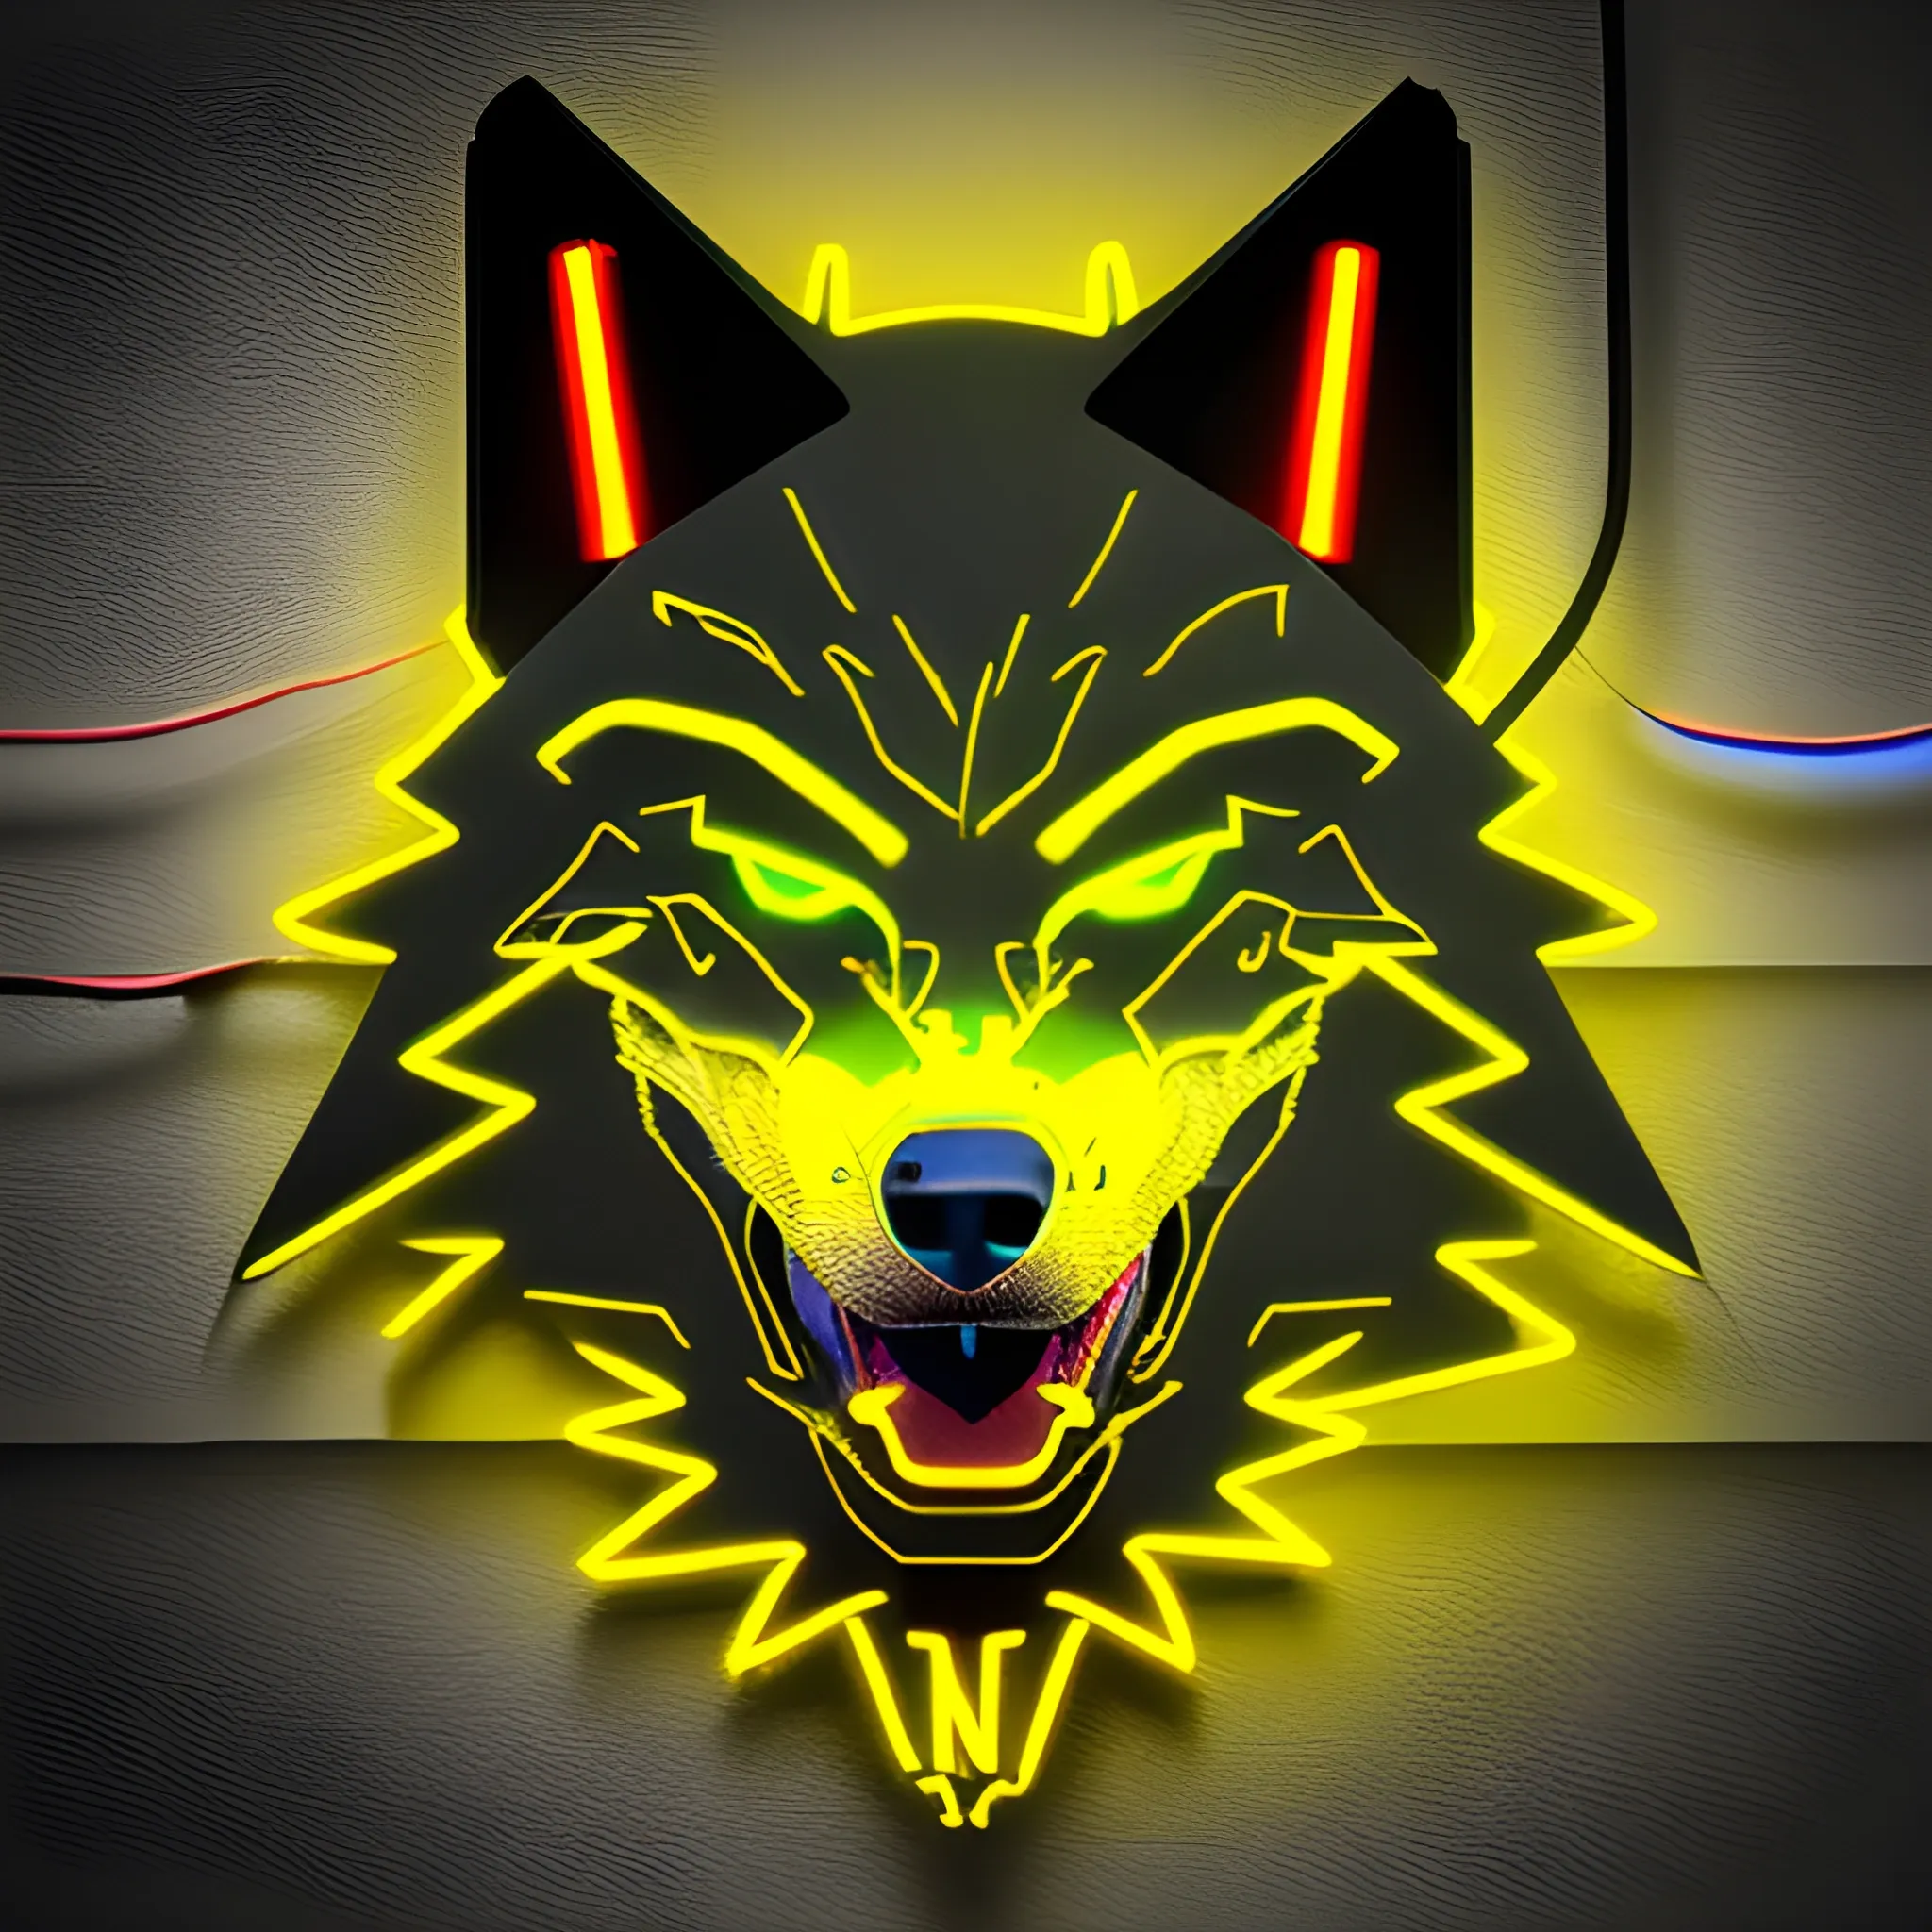 An angry cyberpunk wolf logo, using the yellow neon color, with athe letter "A" at the background, 3D